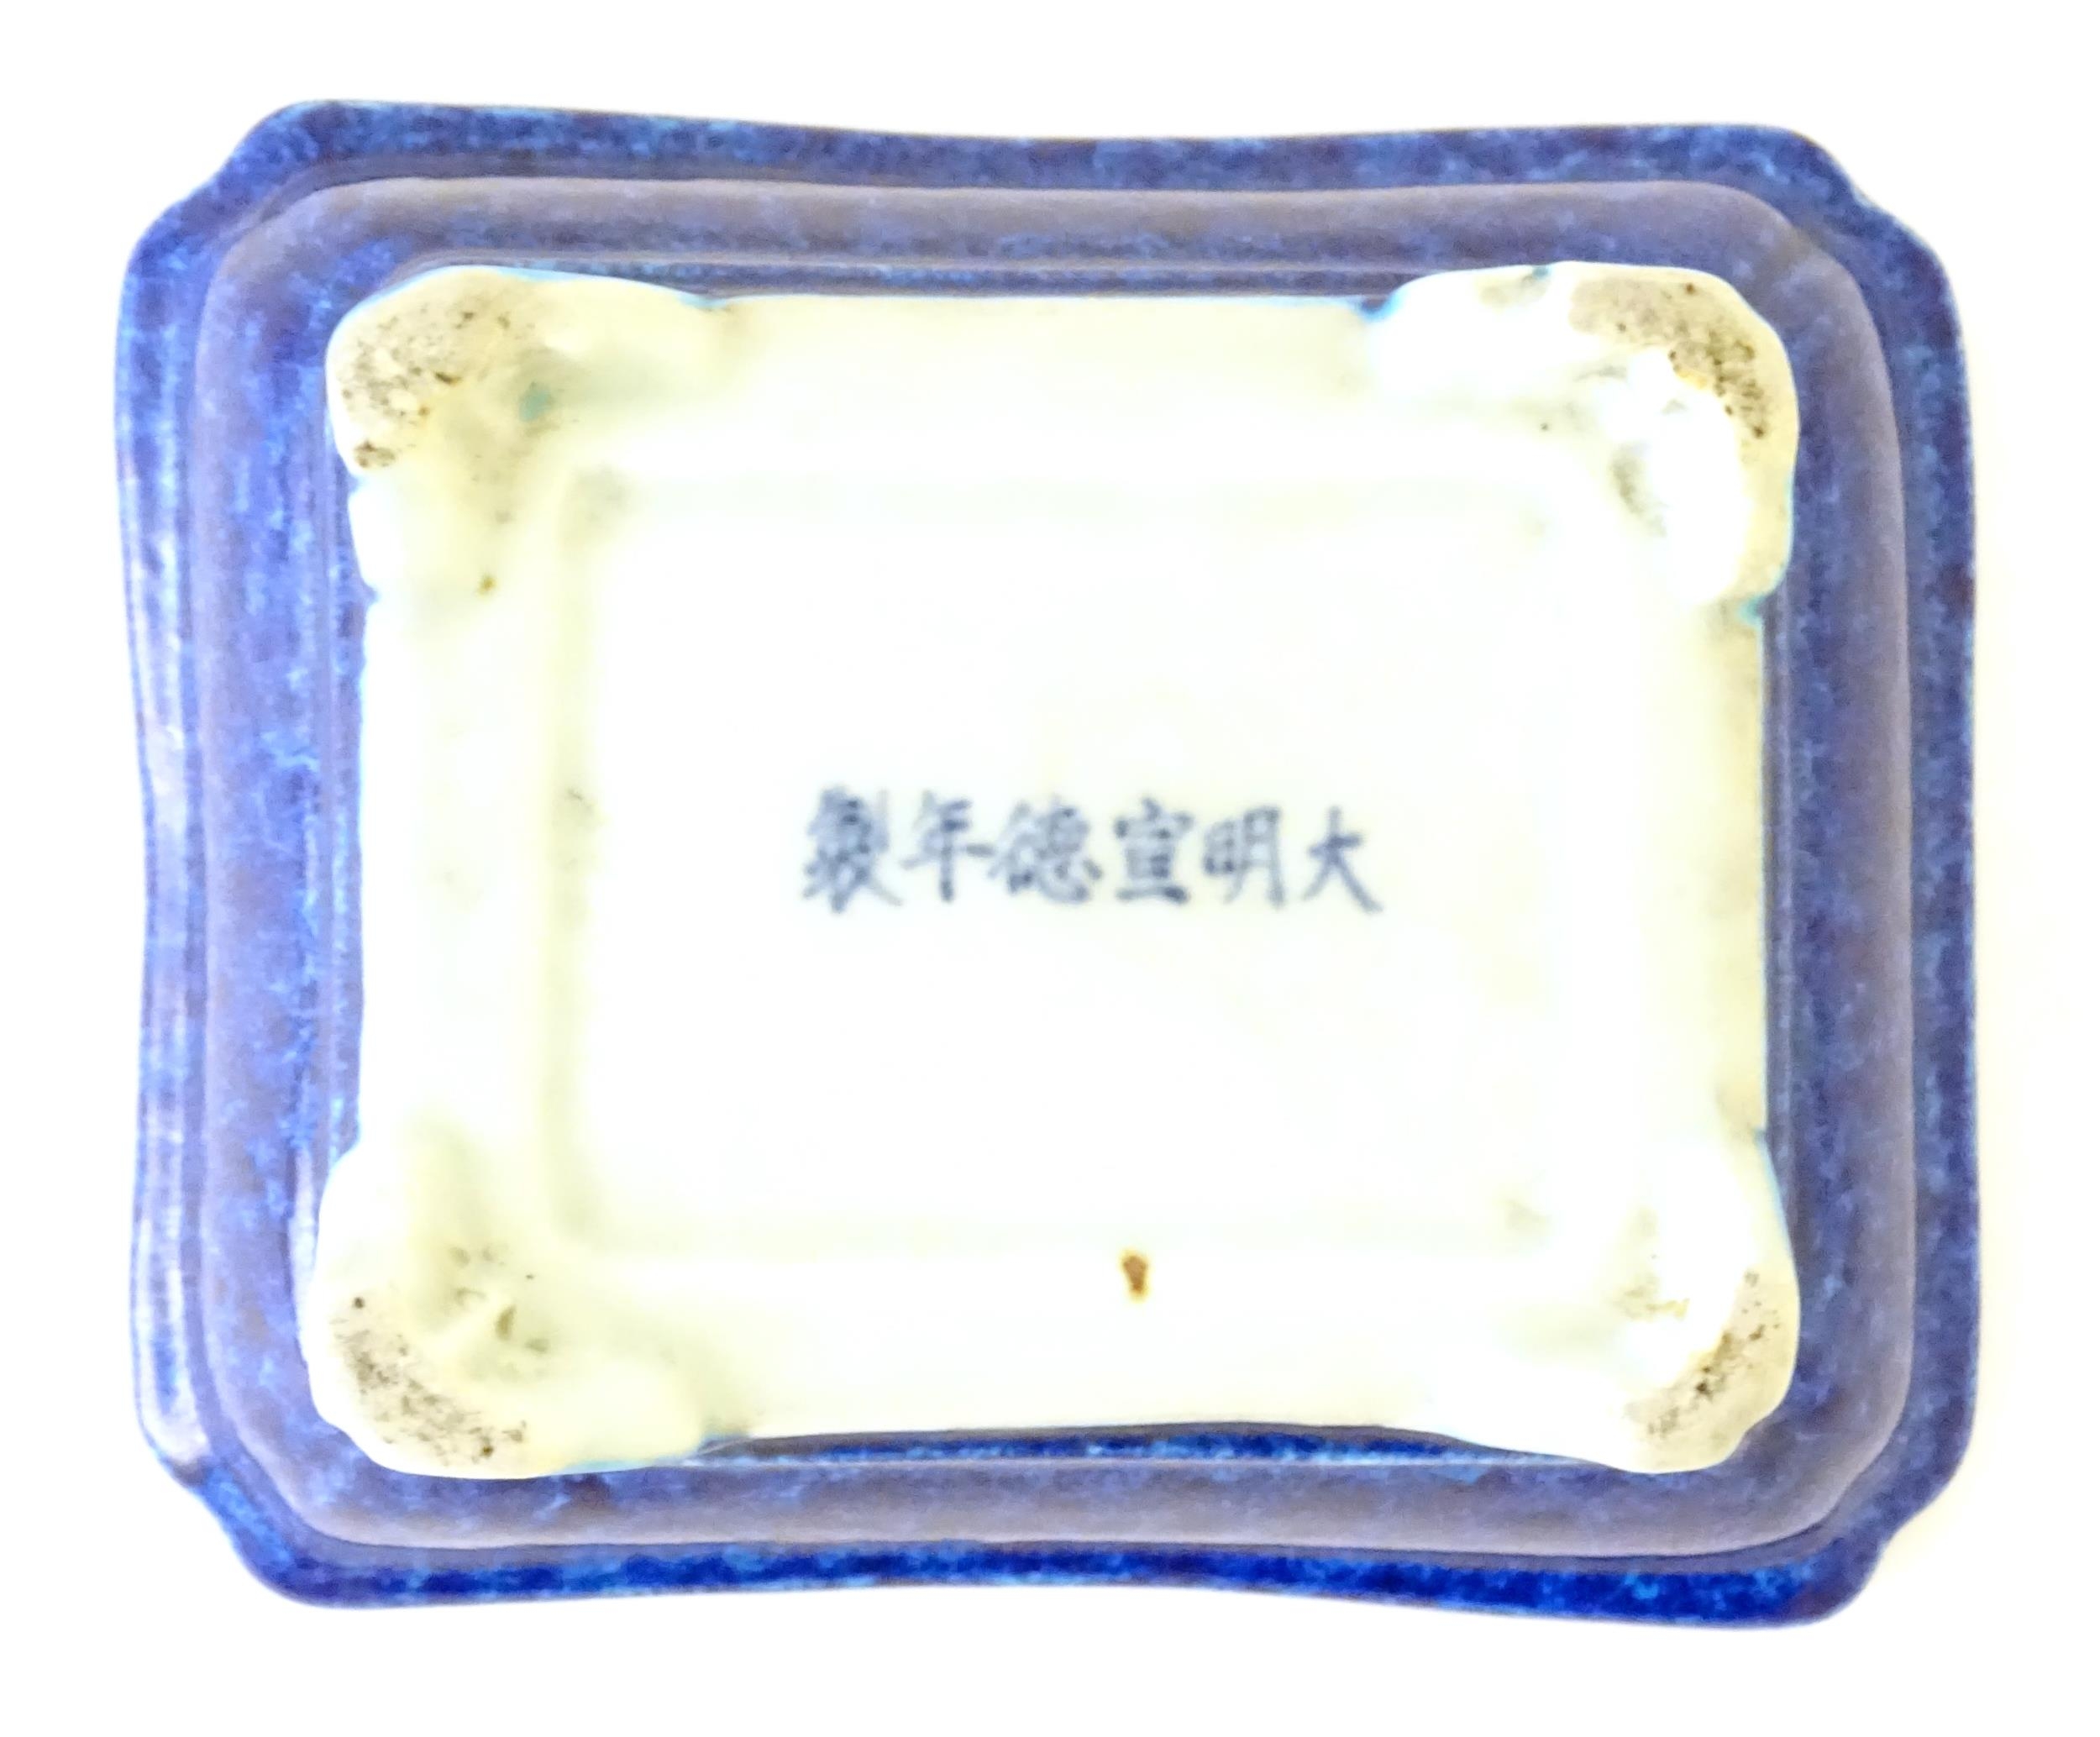 A Chinese dish of rectangular form with a blue glaze, raised on four feet. Character marks under. - Image 8 of 8